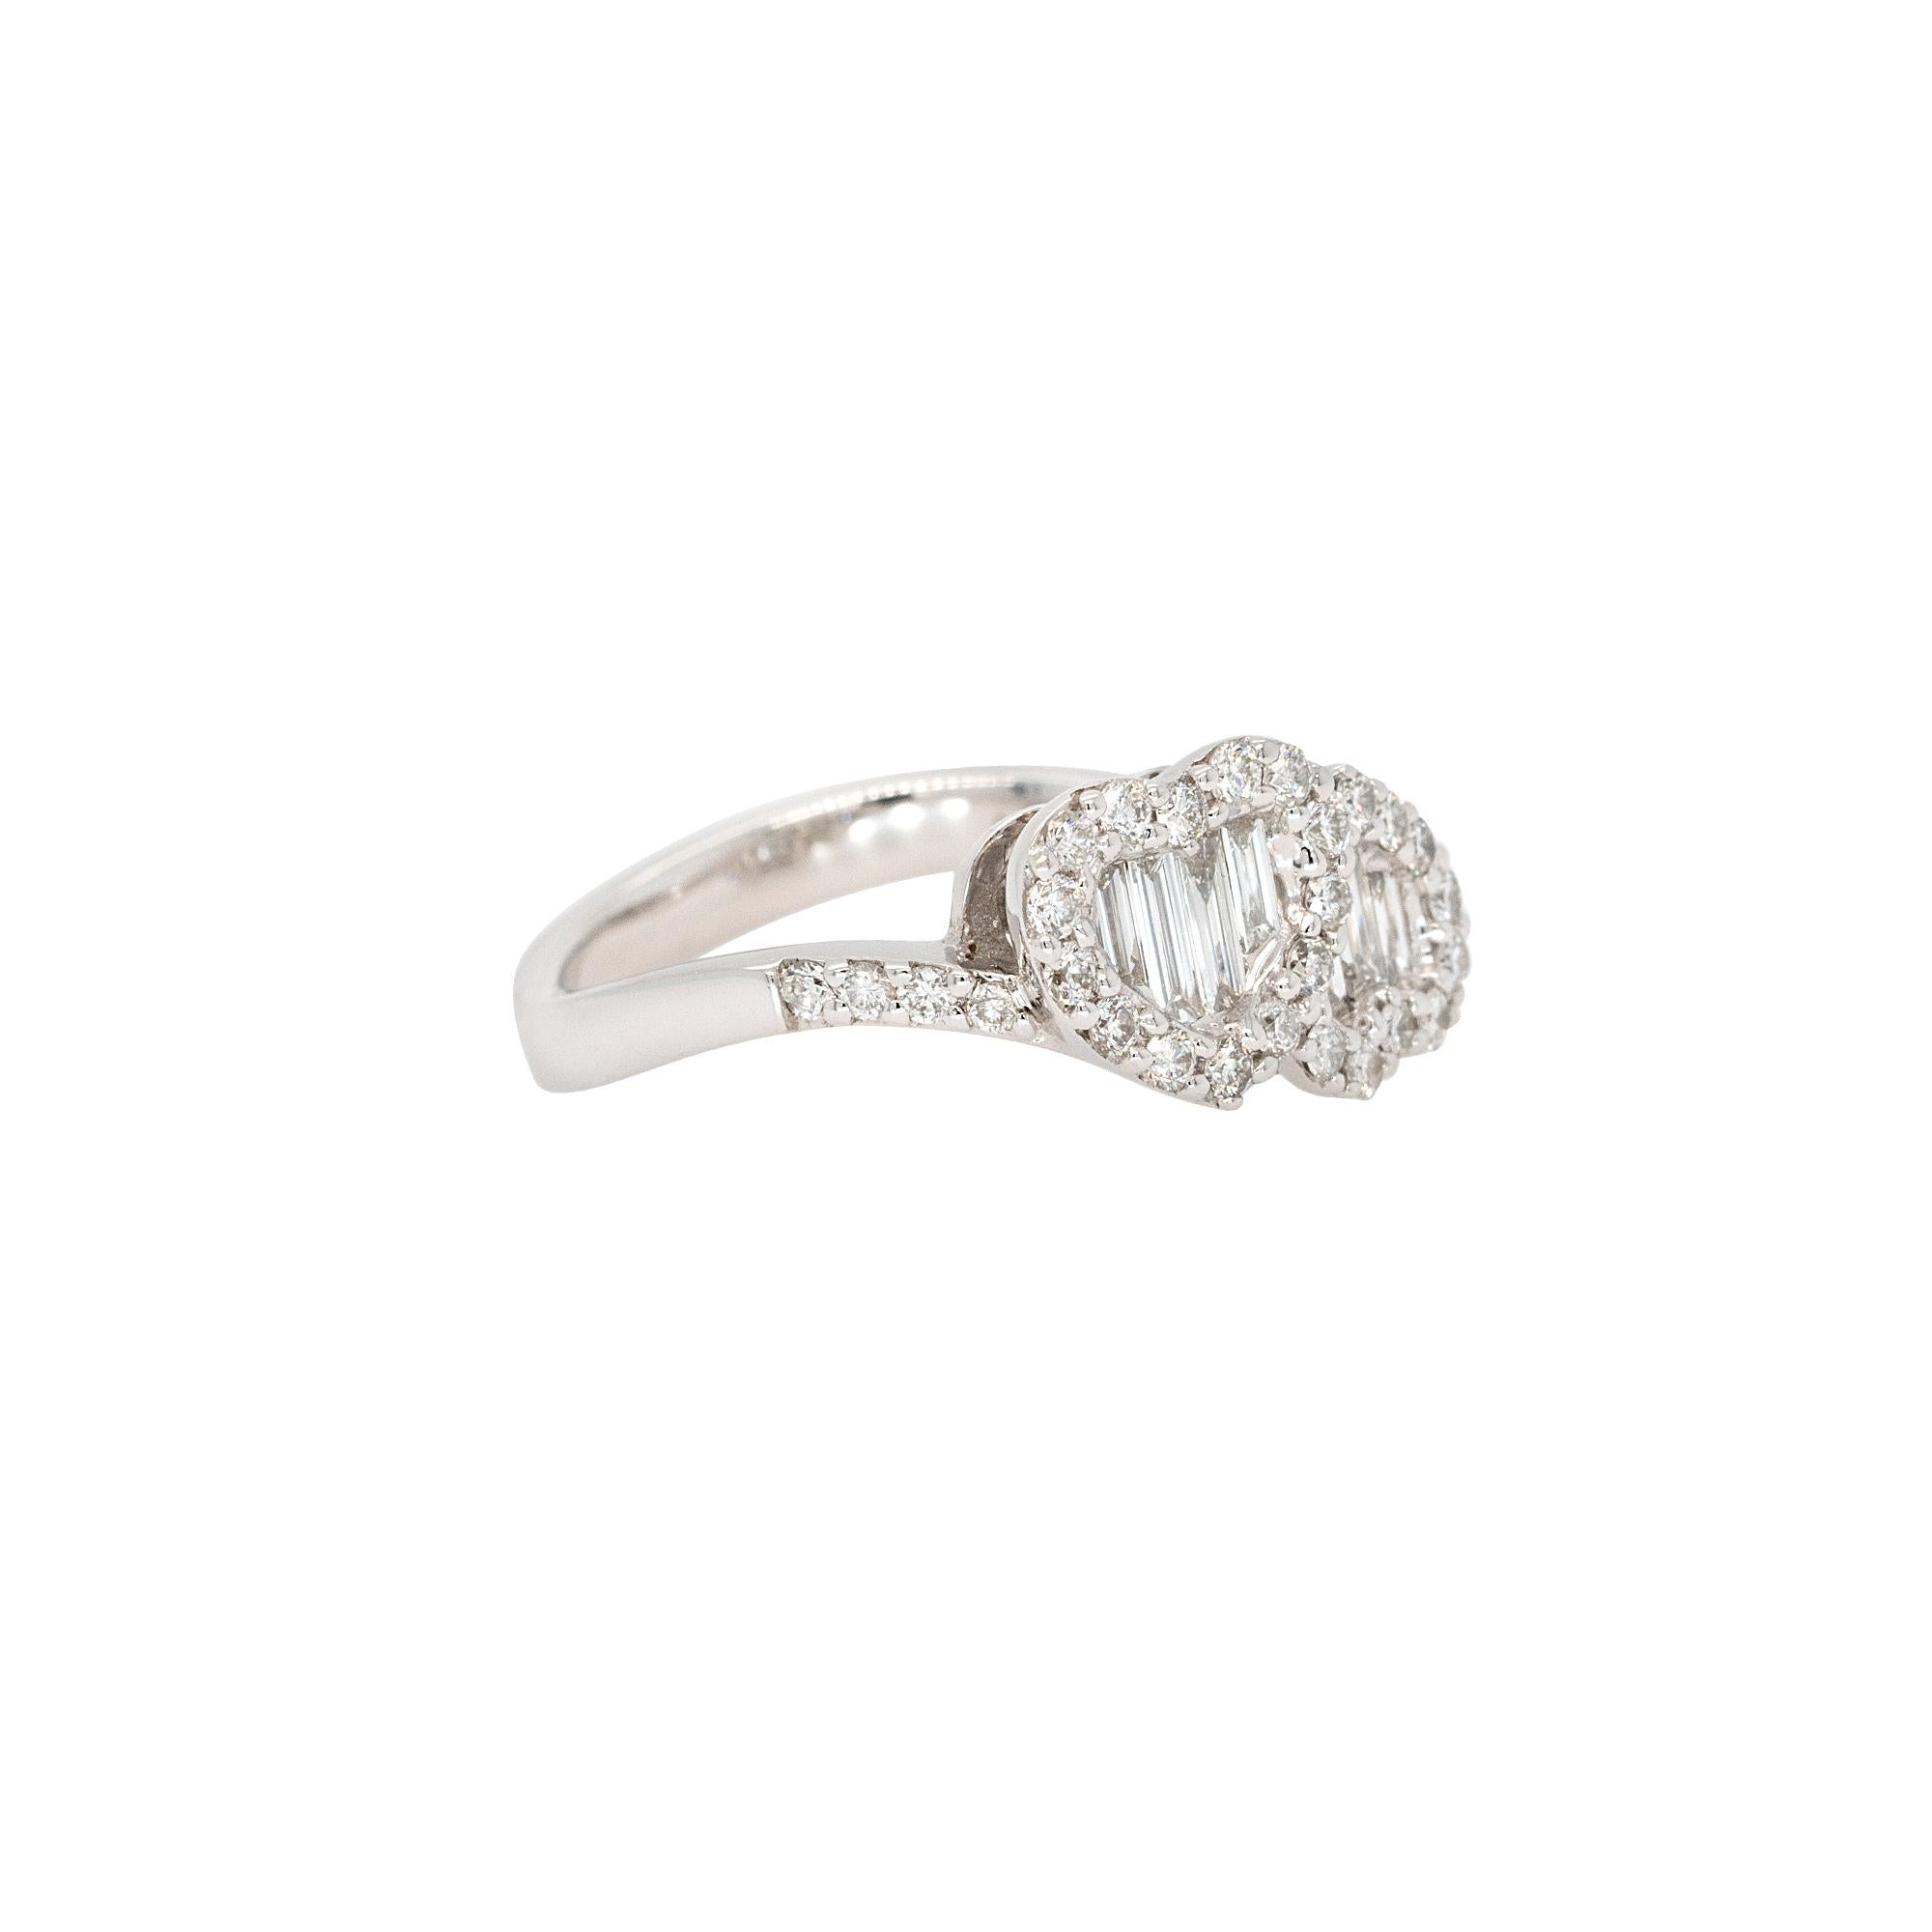 Diamond Details:
0.29ct Baguette Cut Natural Diamond
0.40ct Round Brilliant Natural Diamond
G Color VS Clarity
Ring Material: 18k White Gold
Ring Size: 6.5 (can be sized)
Total Weight: 4.6g (3.0dwt)
This item comes with a presentation box!
SKU: